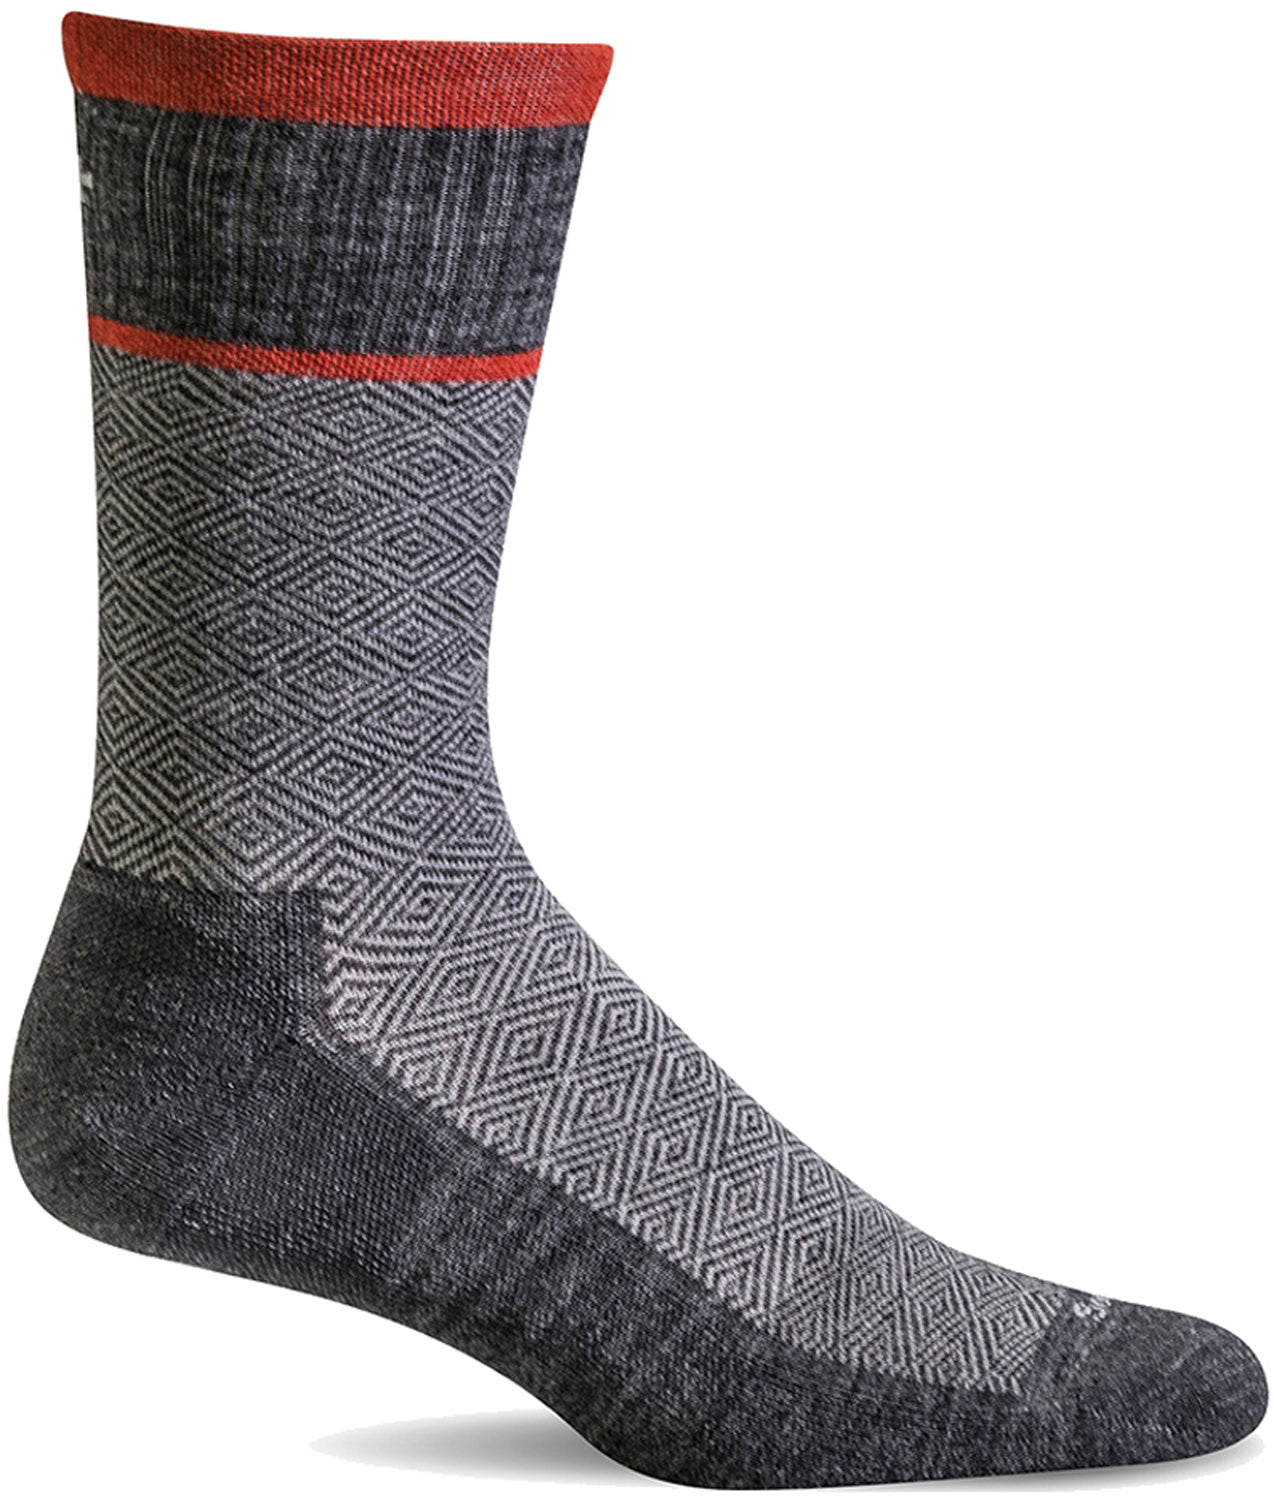 Sockwell Men's Plantar Cush Crew Sock in Charcoal color from the side